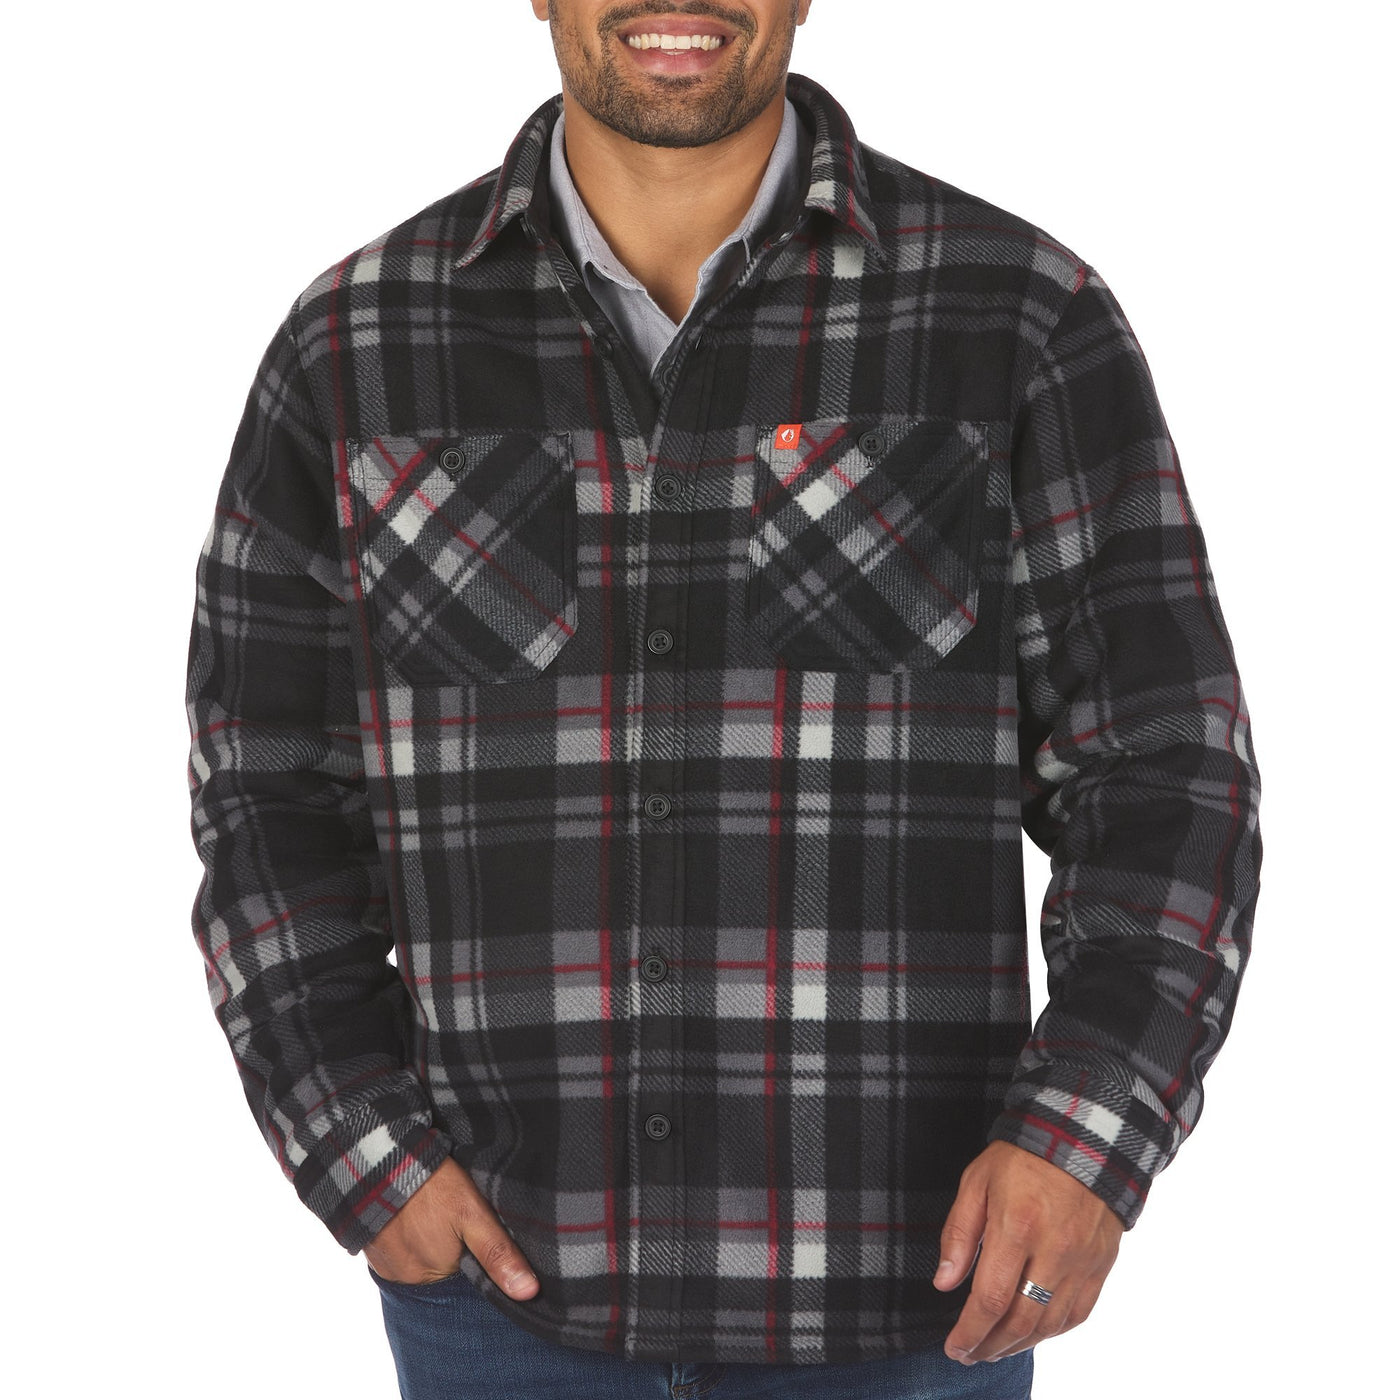 The American Outdoorsman Men's Bonded Polar Fleece Lined Plaid Flannel Shirt Jacket, Perfect for The Outdoors (Navy/Blue, Large)